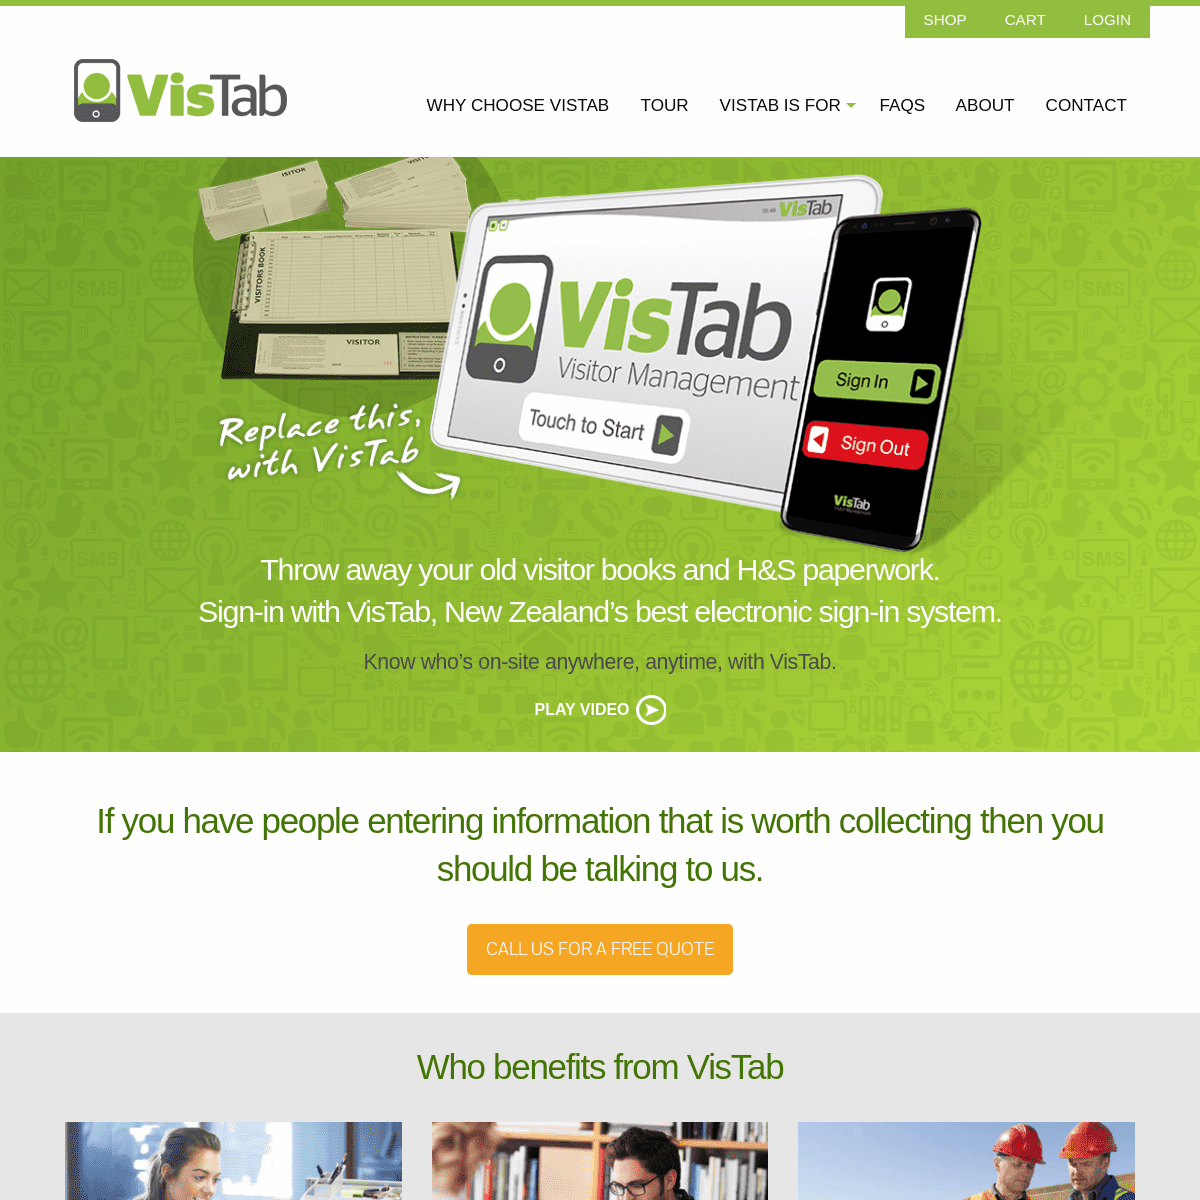 A complete backup of vistab.co.nz